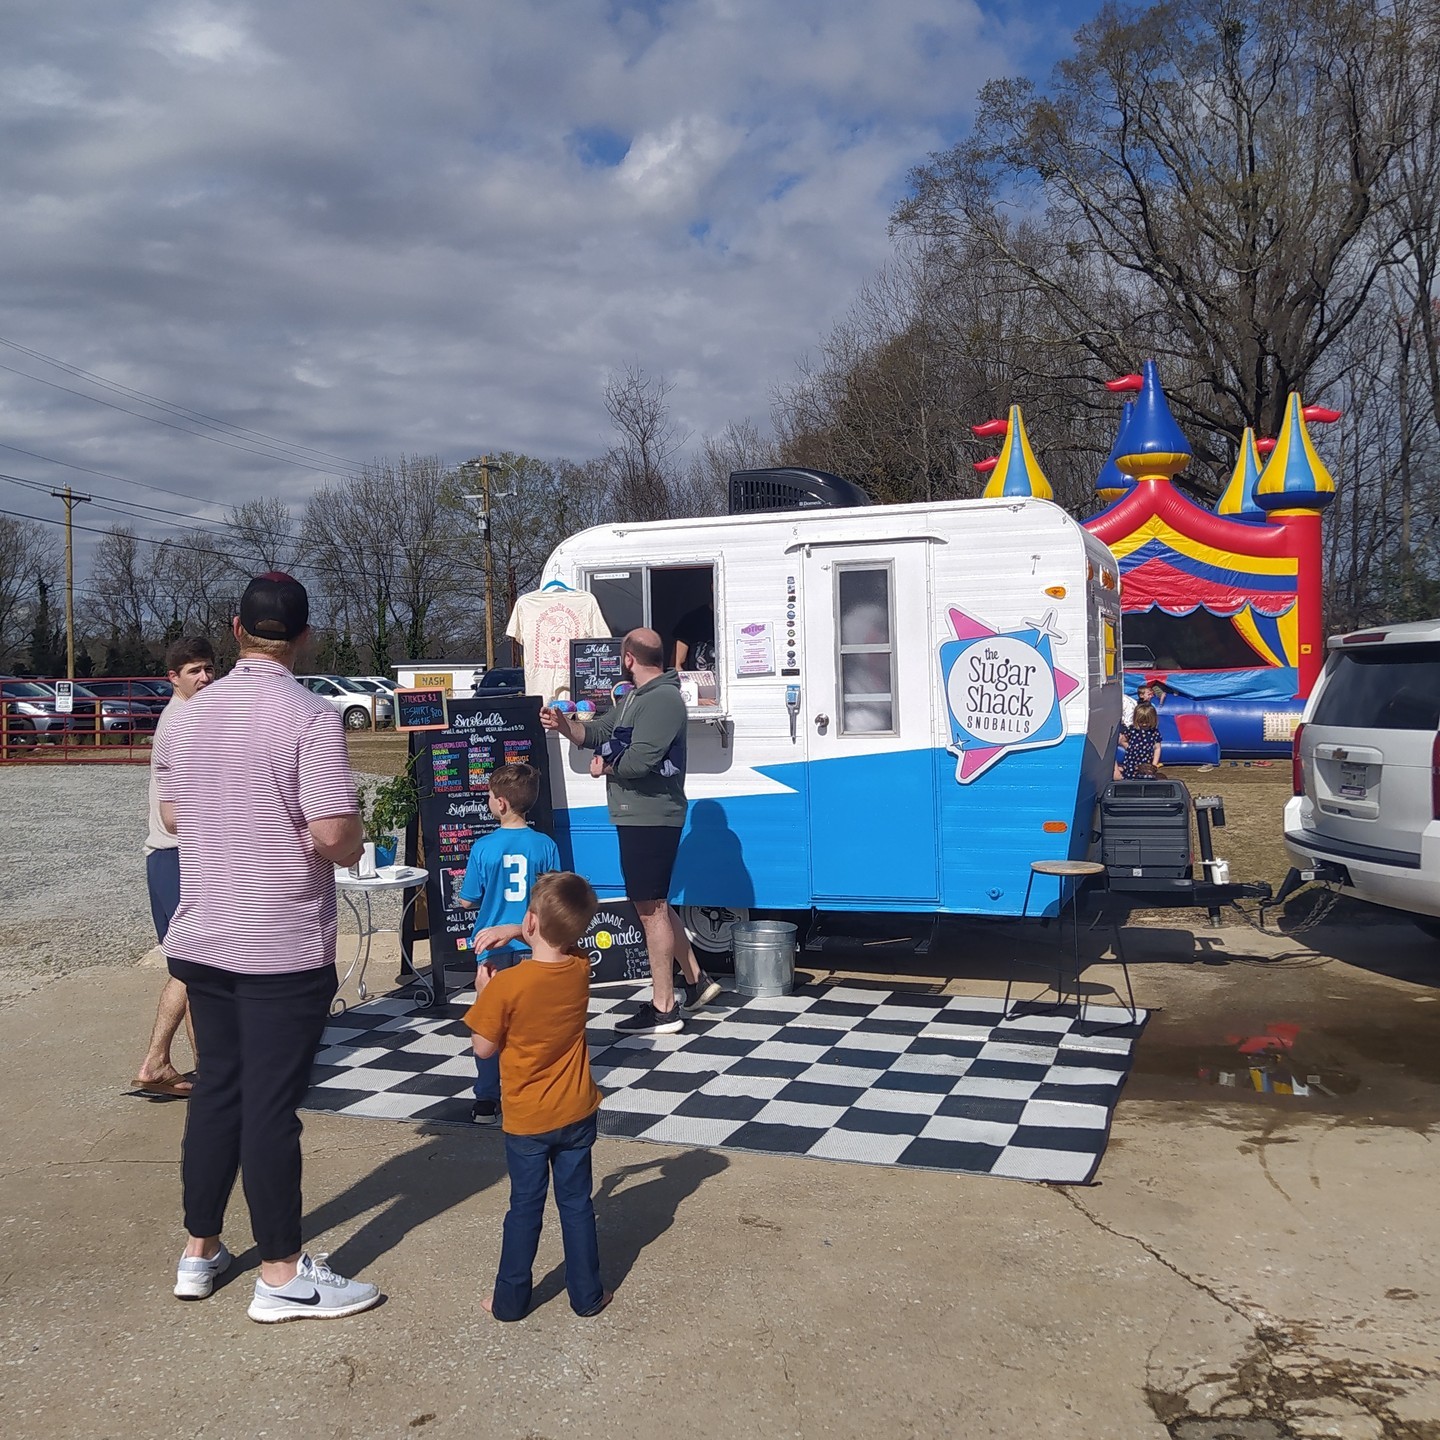 We're gearing up for Kids Play Date at Fretwell. Come on by today between 11 AM and 2 PM to enjoy some fun activities, including:
- Childrens Stories
- Face Painting
- Kids Songs
- Games
&amp; More!

See you soon, at Fretwell!

#KidsPlayDate #DiscoverSpartanburg #SpartanburgSC #SpartanburgCommunity #SpartanburgFun